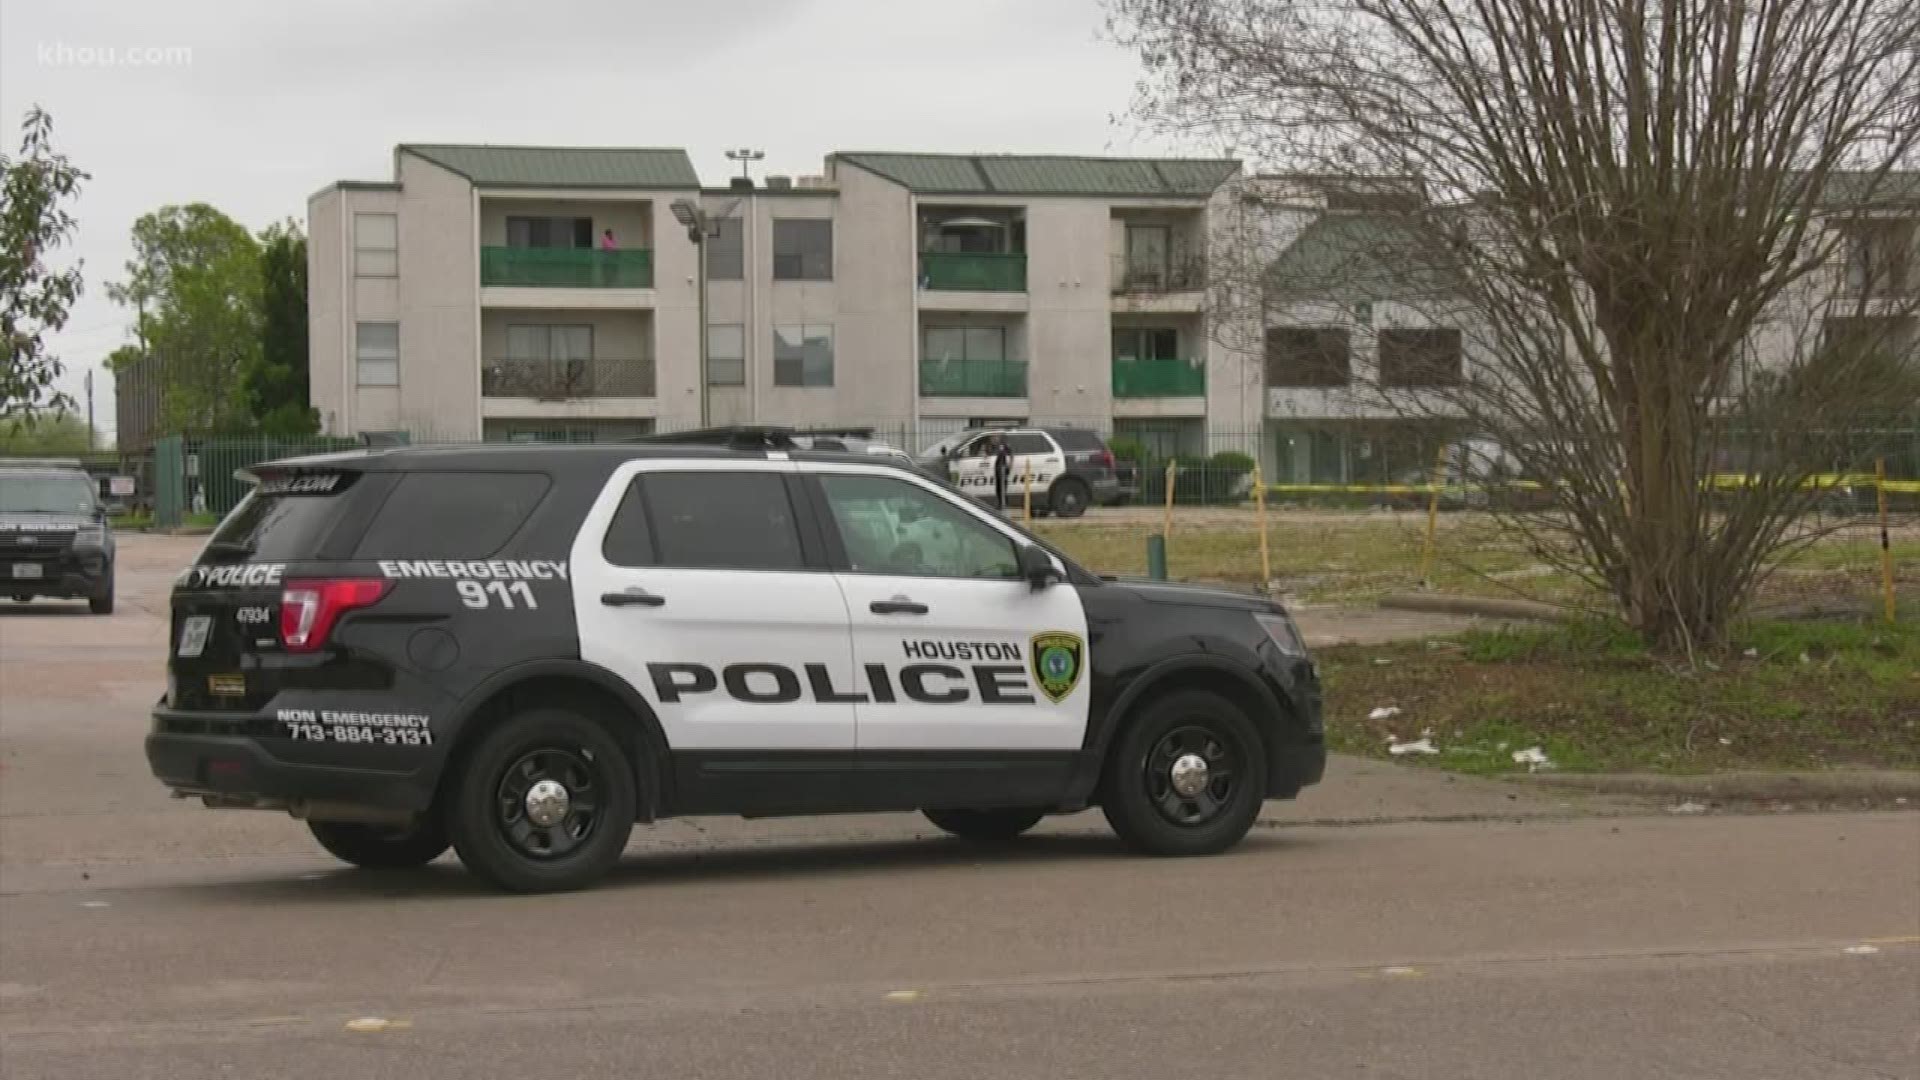 A man was found shot to death near an apartment complex in southwest Houston. Witnesses said he got into an argument with someone before he was shot.